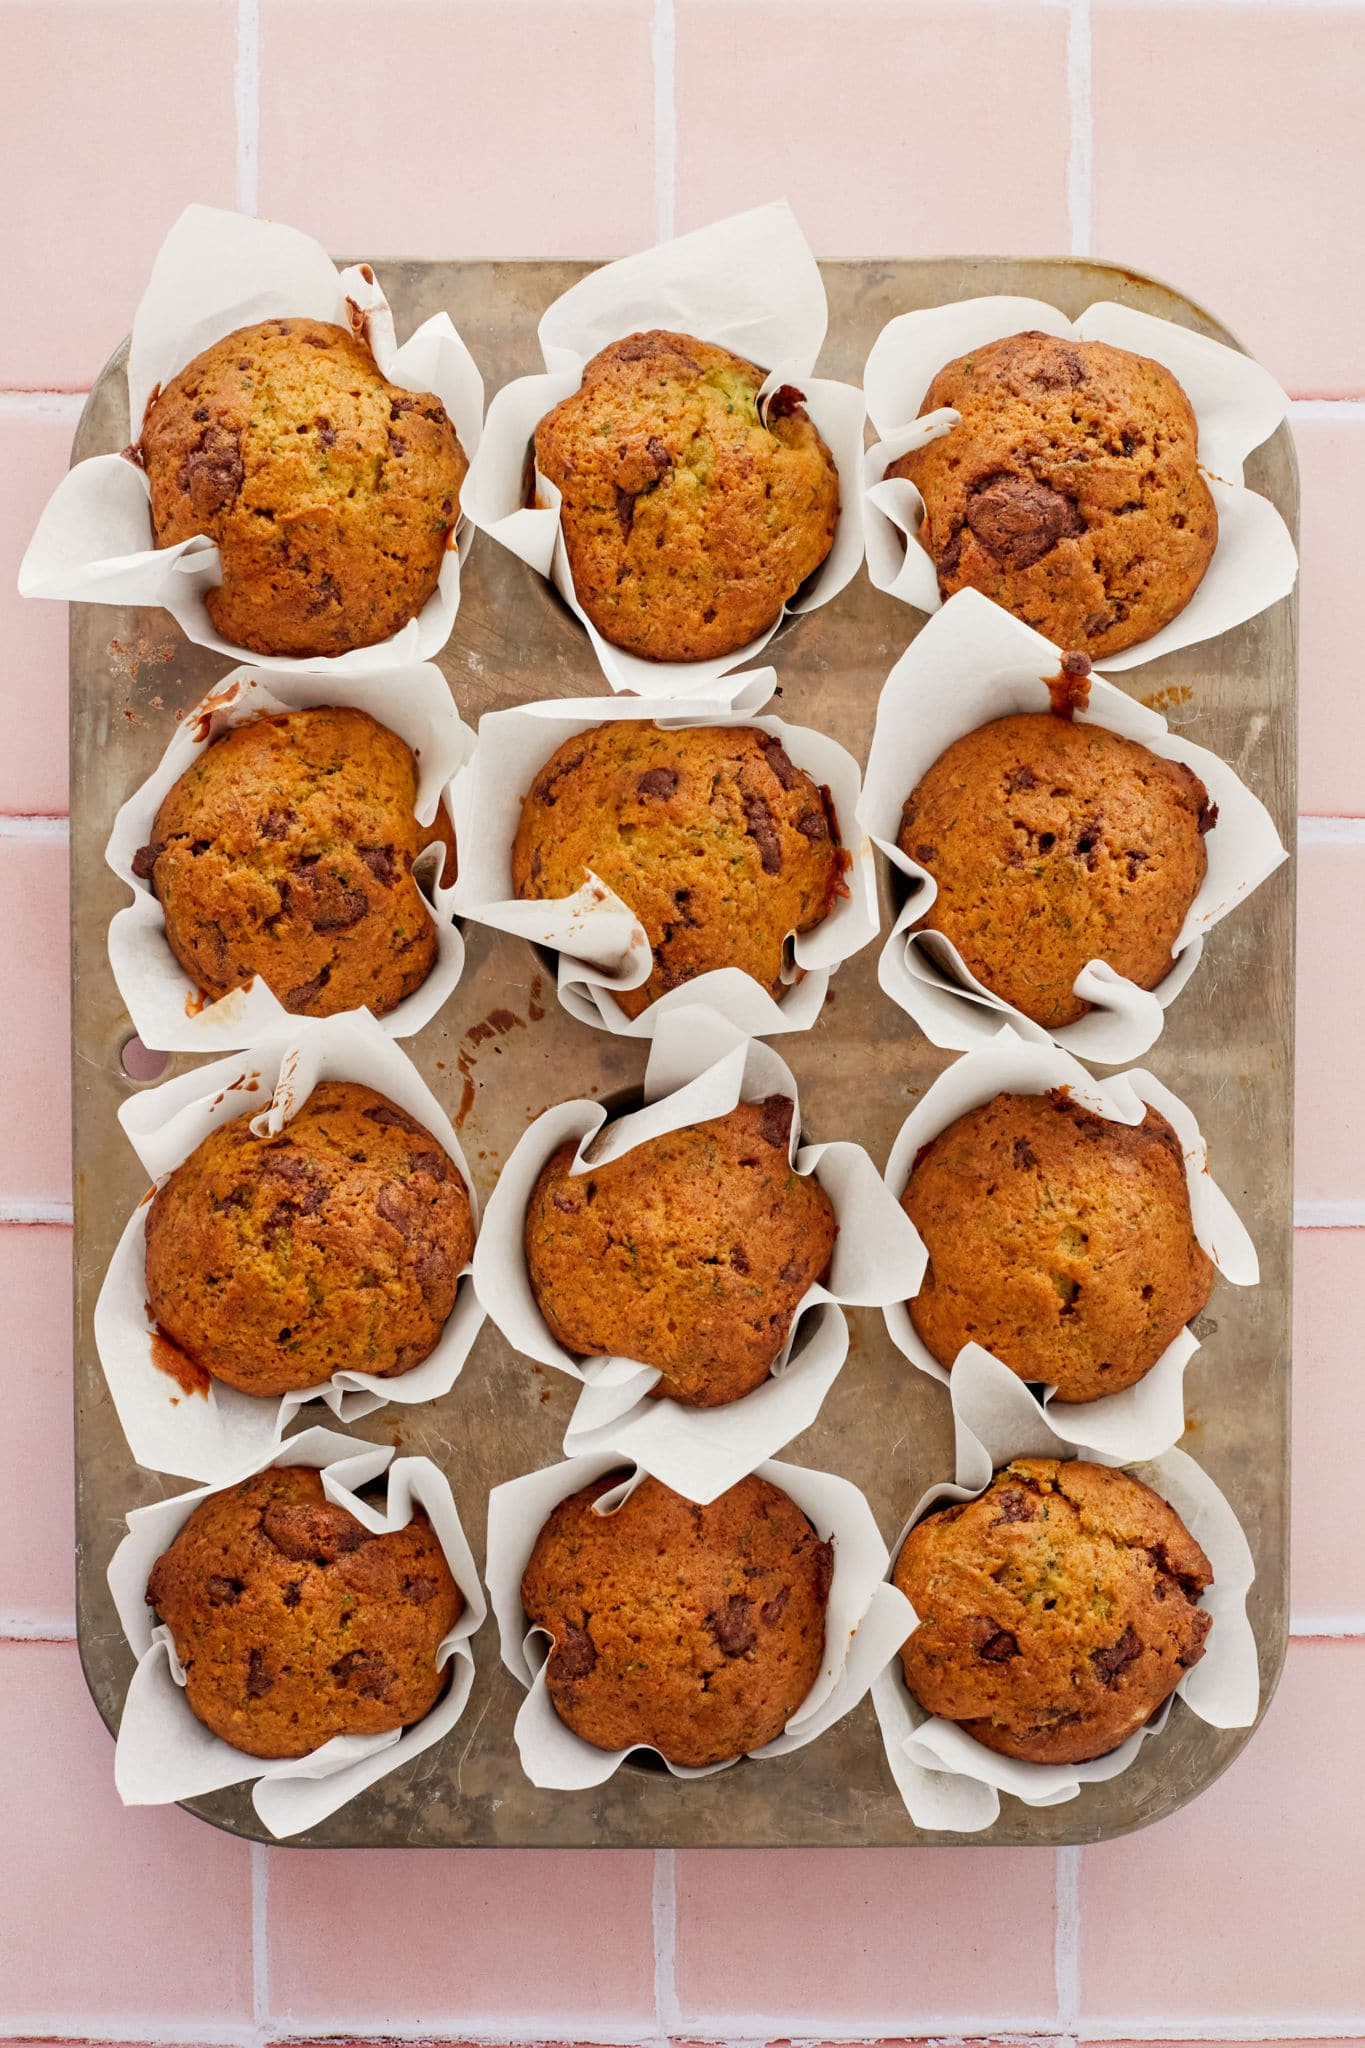 A dozen zucchini muffins with chocolate chips rest in their baking tray on top of a pink tile background.